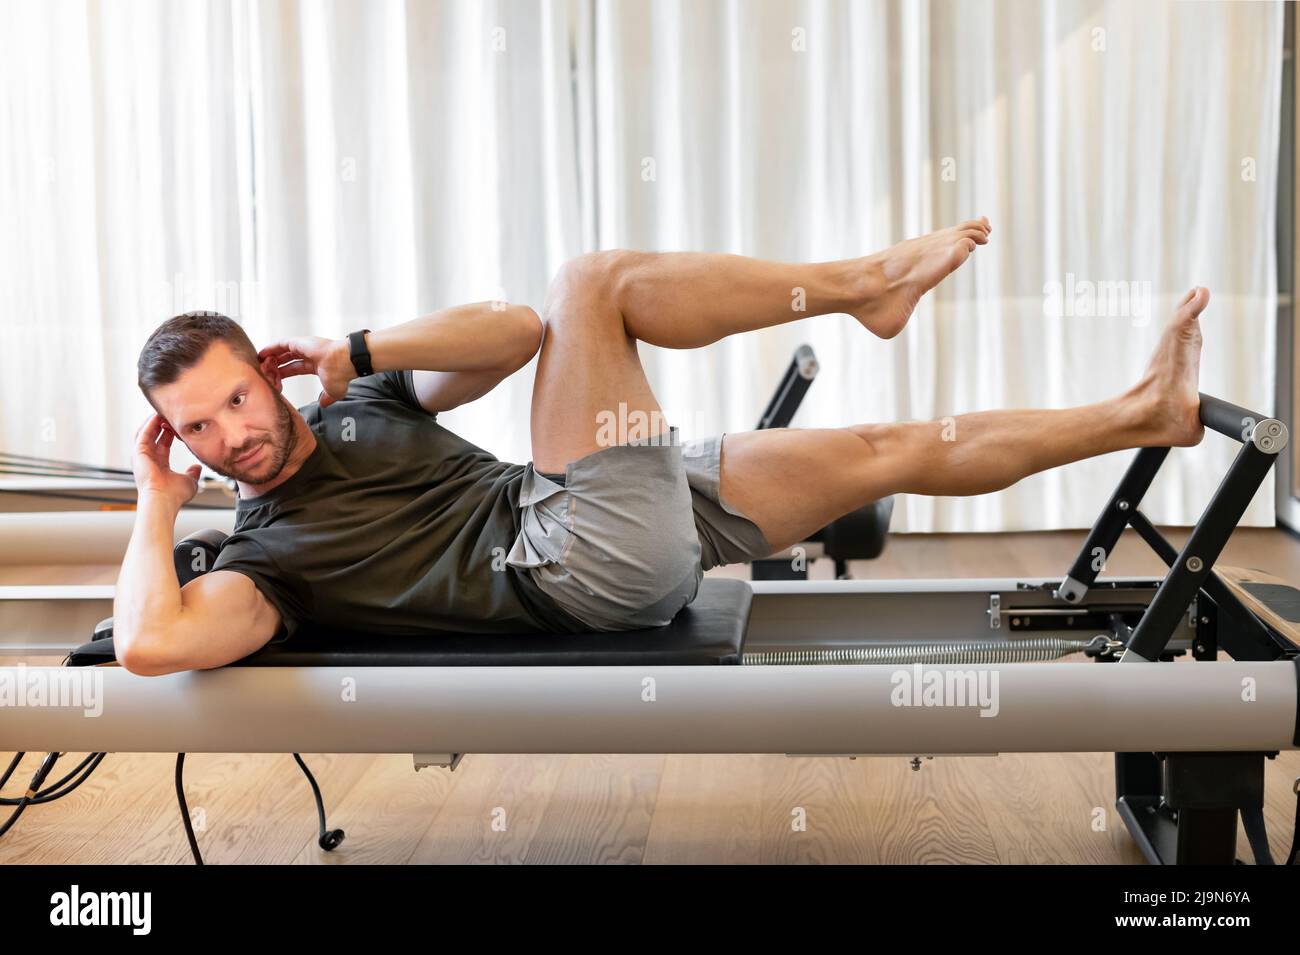 Side view of barefoot male athlete lying on pilates reformer and performing abs exercise during fitness workout. Pilates man concept. Stock Photo